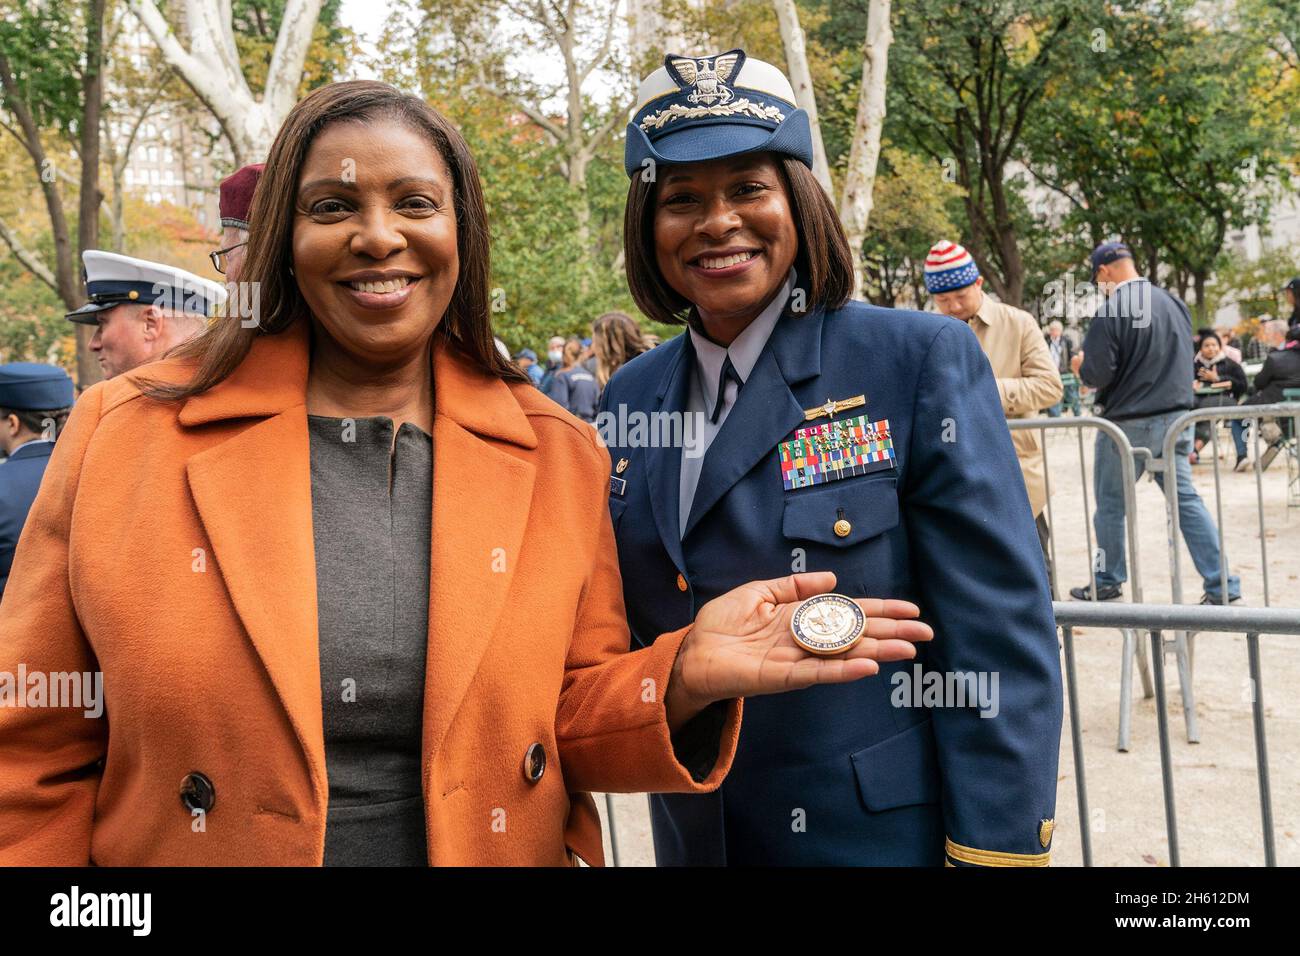 New York, USA. 11th Nov, 2021. State Attorney General Letitia James and US Coast Guards captain Zeita Merchant attend Wreath Laying ceremony on Veterans Day on Madison Square Park. James displays medal given by Captain Merchant. In 2020 the ceremony and floowing parade were canceled because of COVID-19 pandemic. The nation's largest celebration of veterans in the largest city in America once again was held in person on Veterans Day. (Photo by Lev Radin/Pacific Press) Credit: Pacific Press Media Production Corp./Alamy Live News Stock Photo